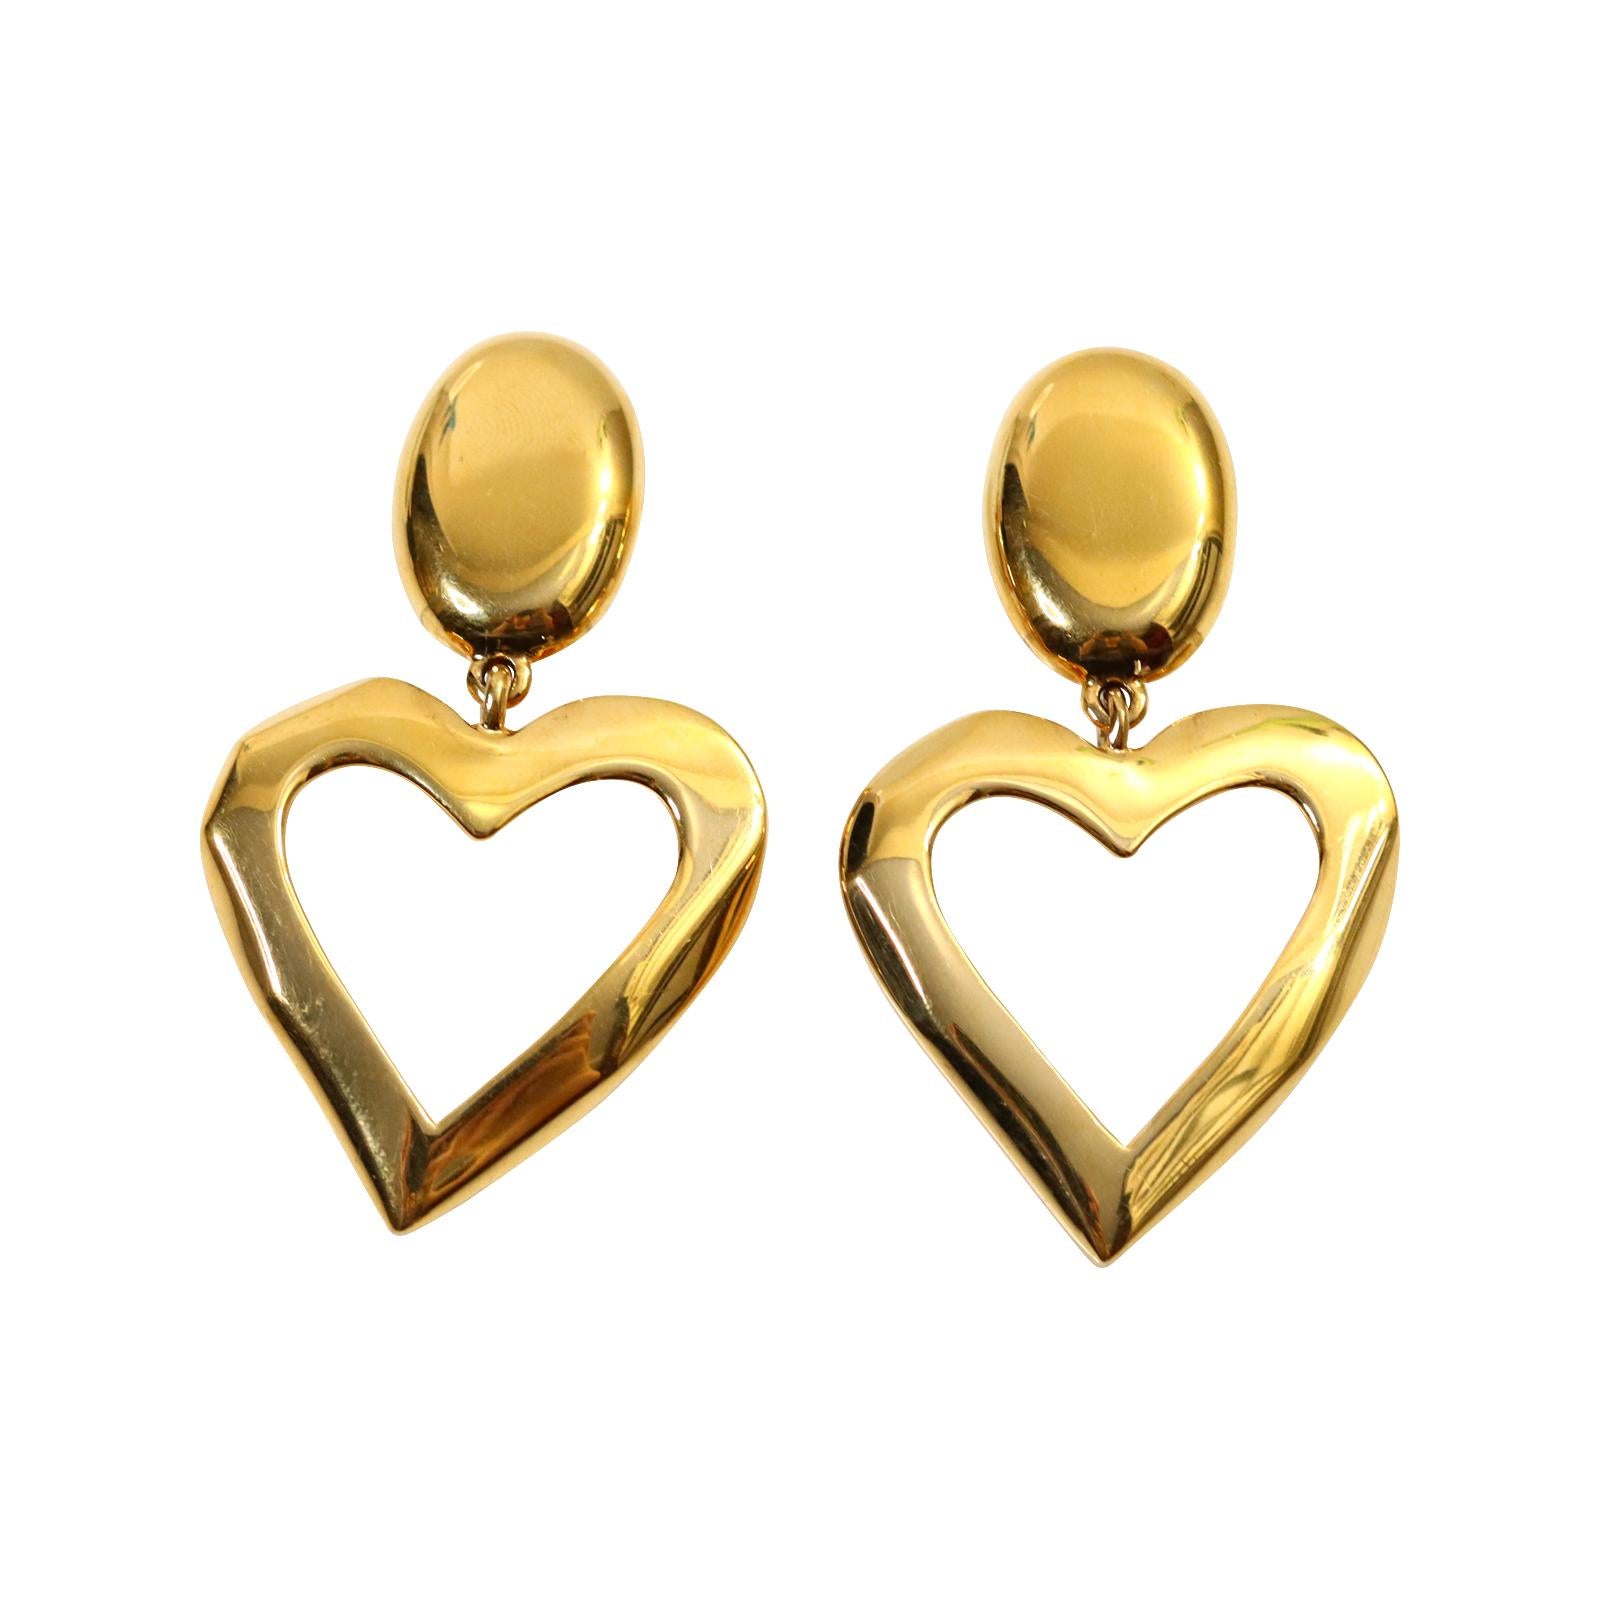 Vintage St John Gold Dangling Heart  Earrings Circa 1990s. St John made some great jewelry.  These dangling gold hearts look so chic and stunning with everything.  Substantial and well made. Clip On.  These will make everything look put together.